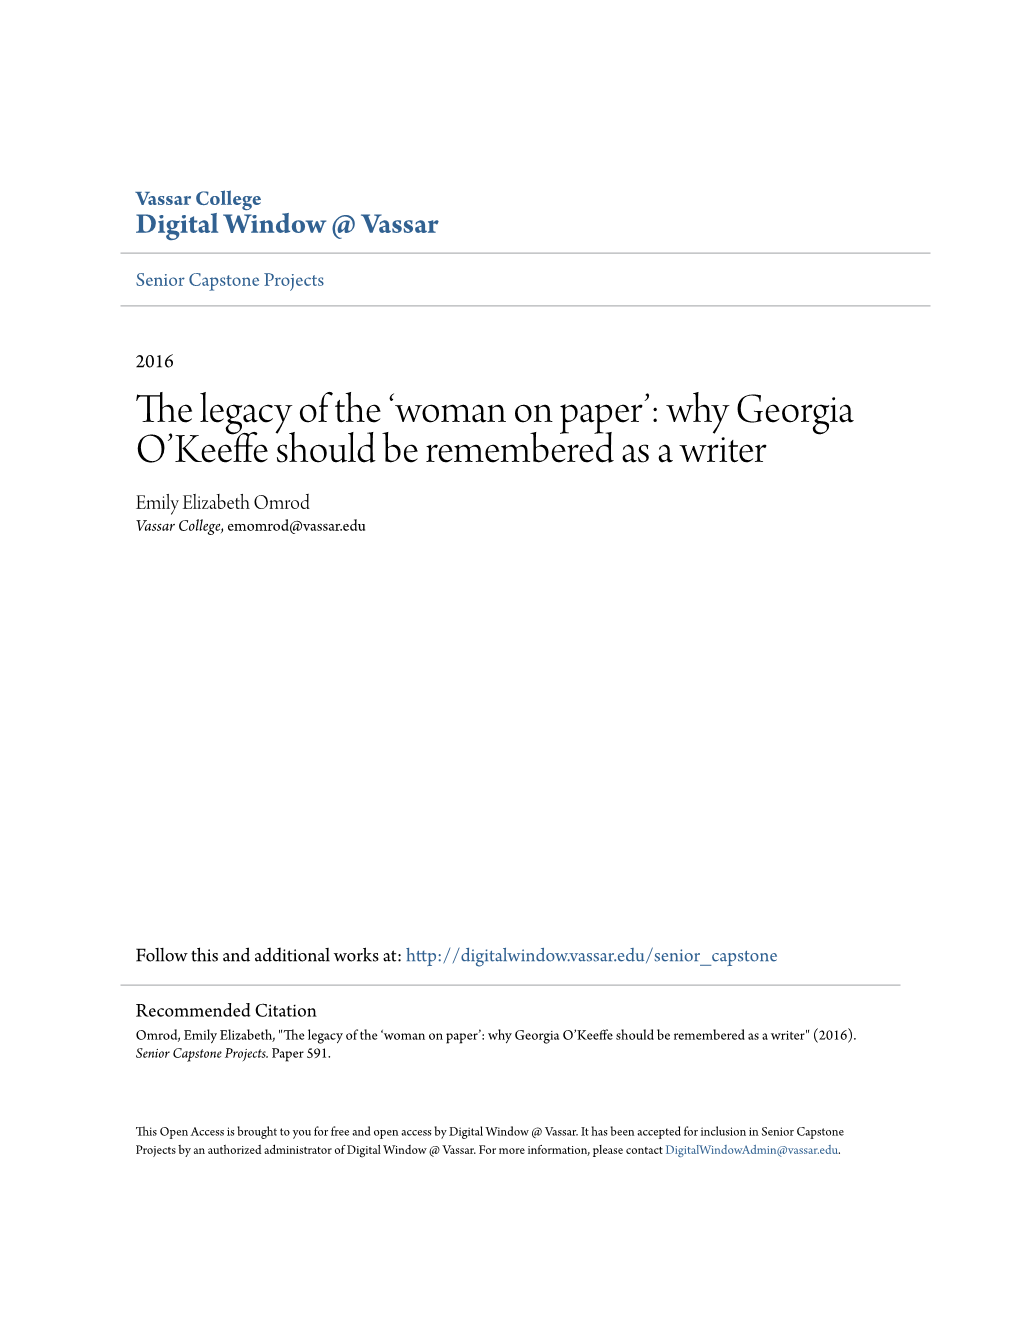 'Woman on Paper': Why Georgia O'keeffe Should Be Remembered As A